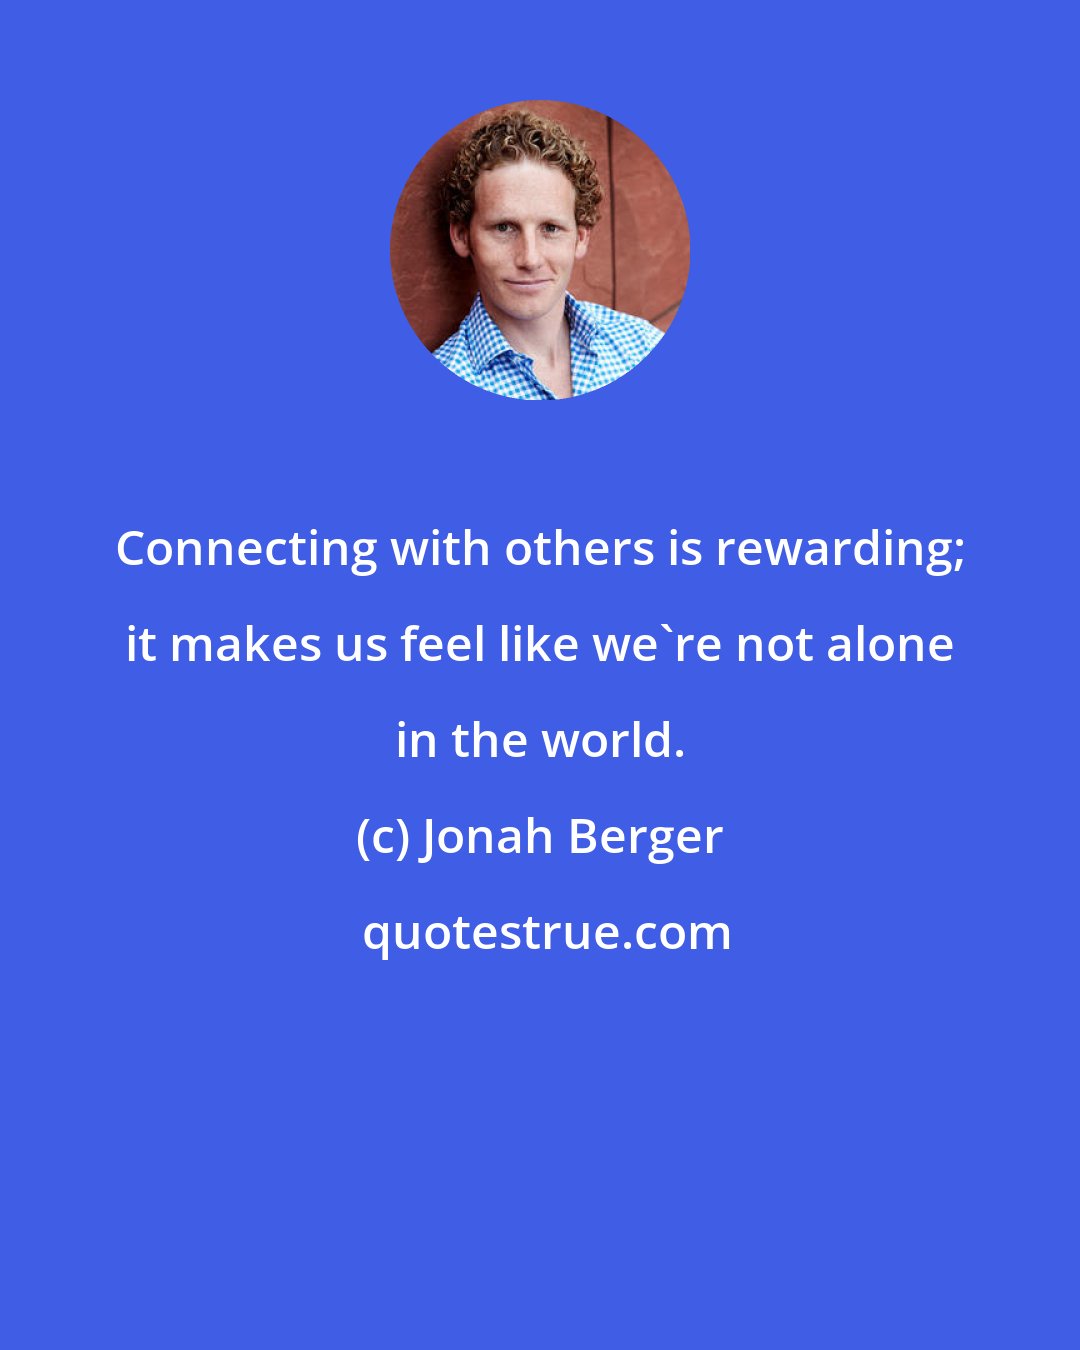 Jonah Berger: Connecting with others is rewarding; it makes us feel like we're not alone in the world.